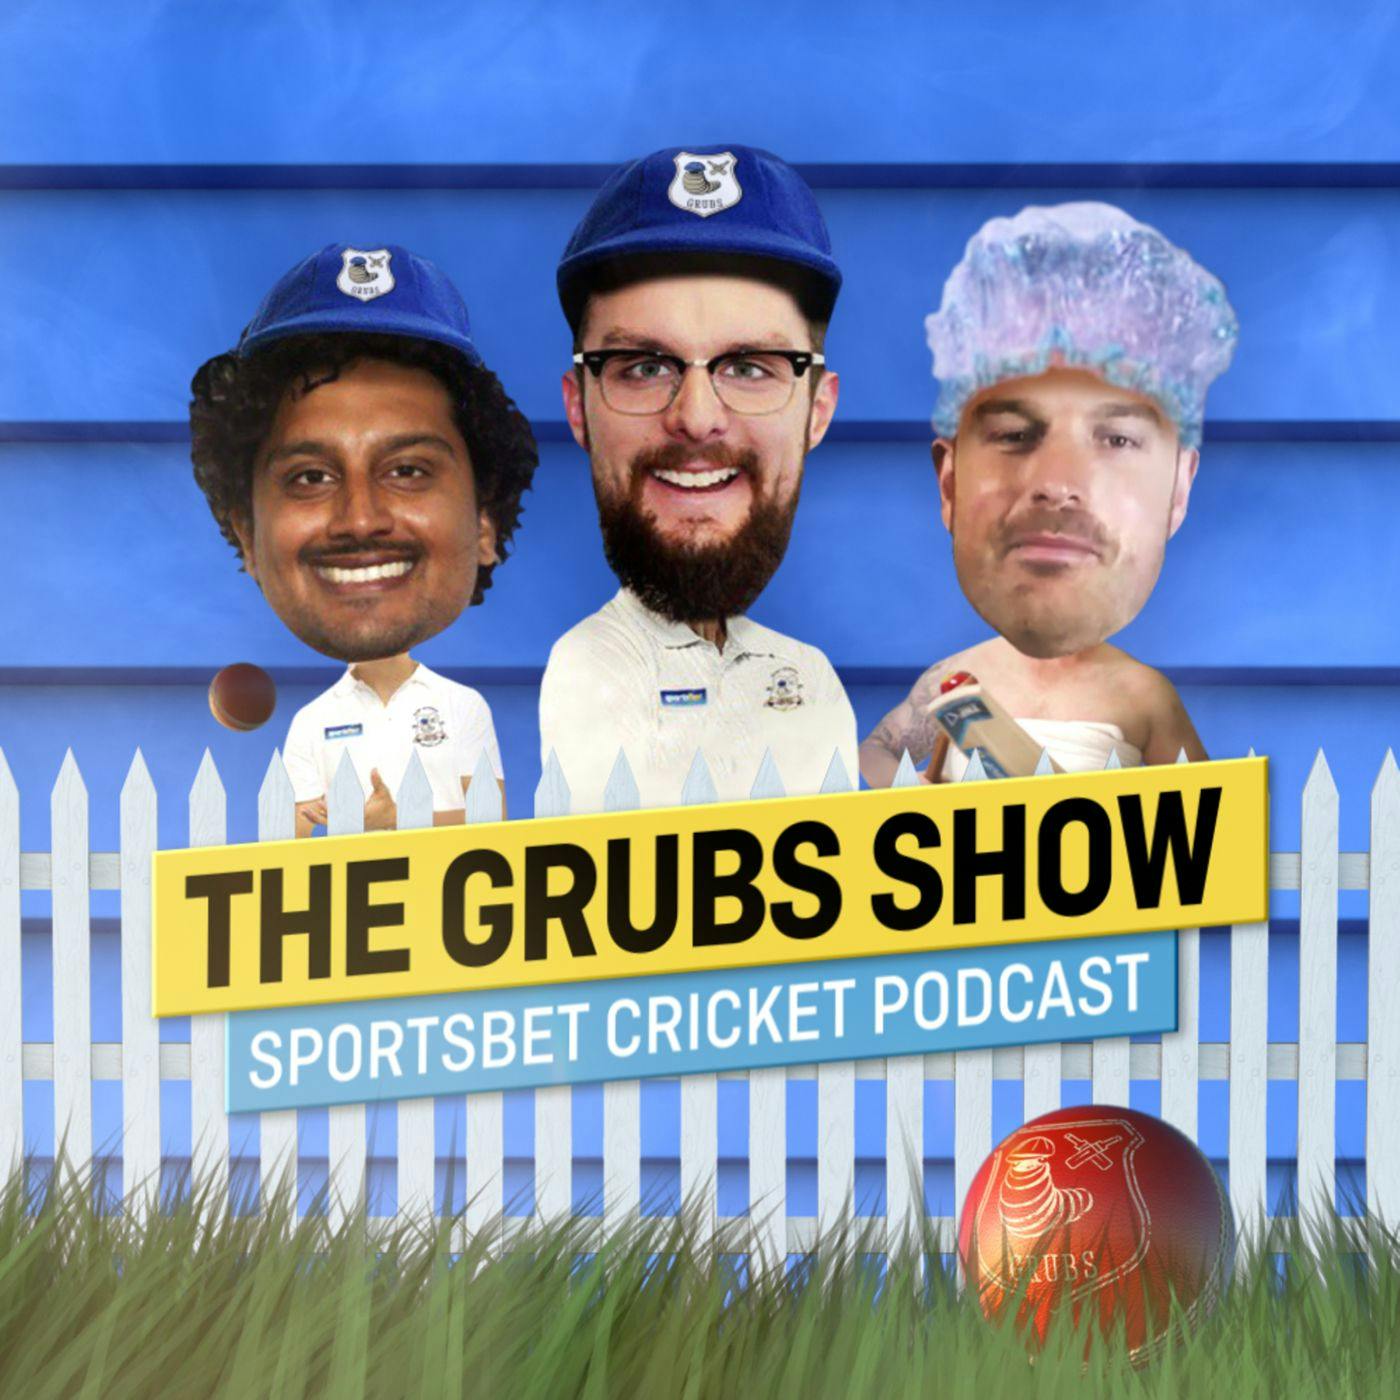 Three Slips No Cover - The Grubs review The Test (Part 4)